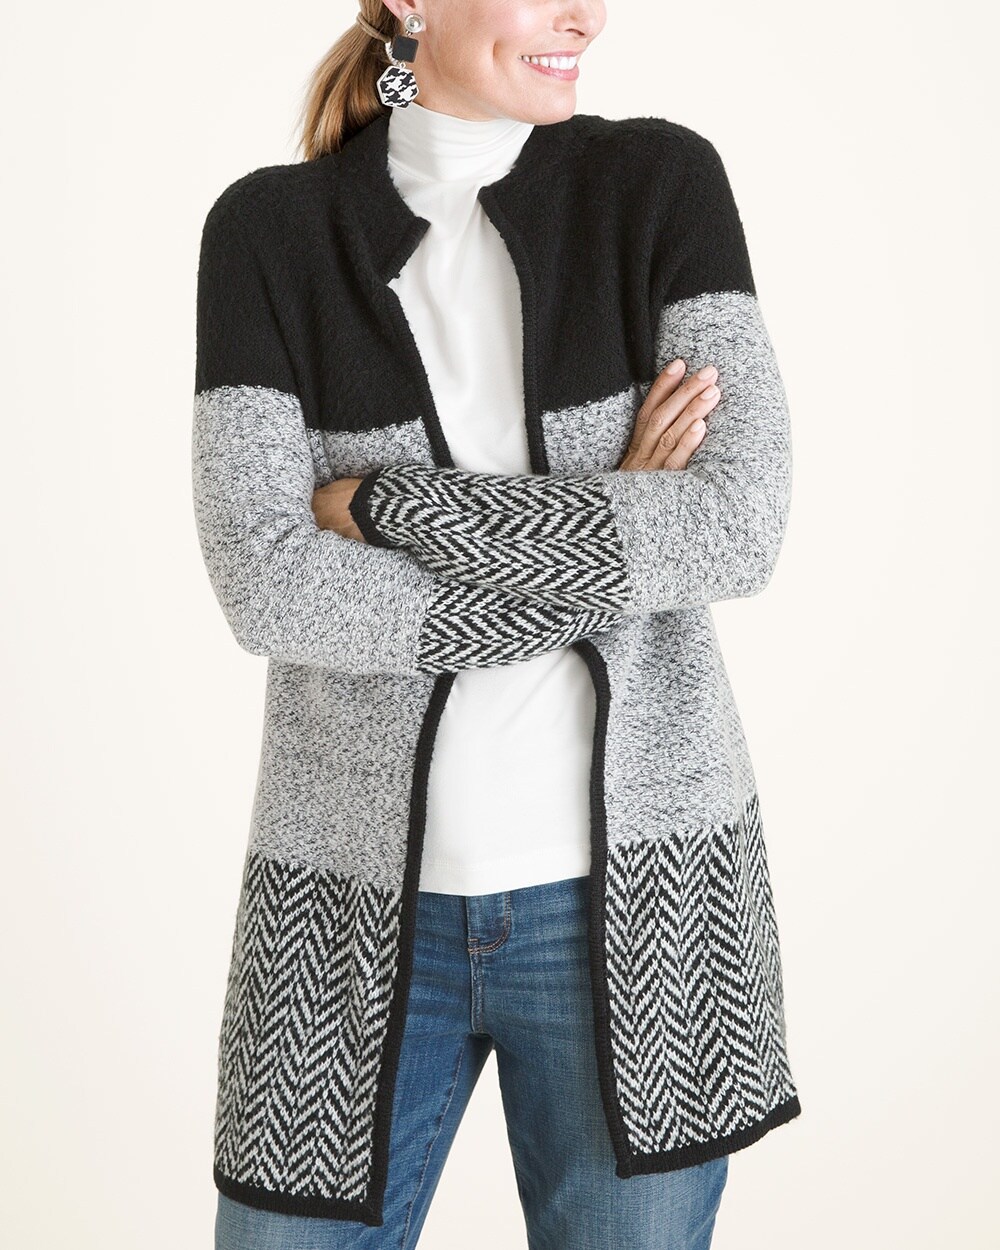 Black and White Colorblock Cardigan